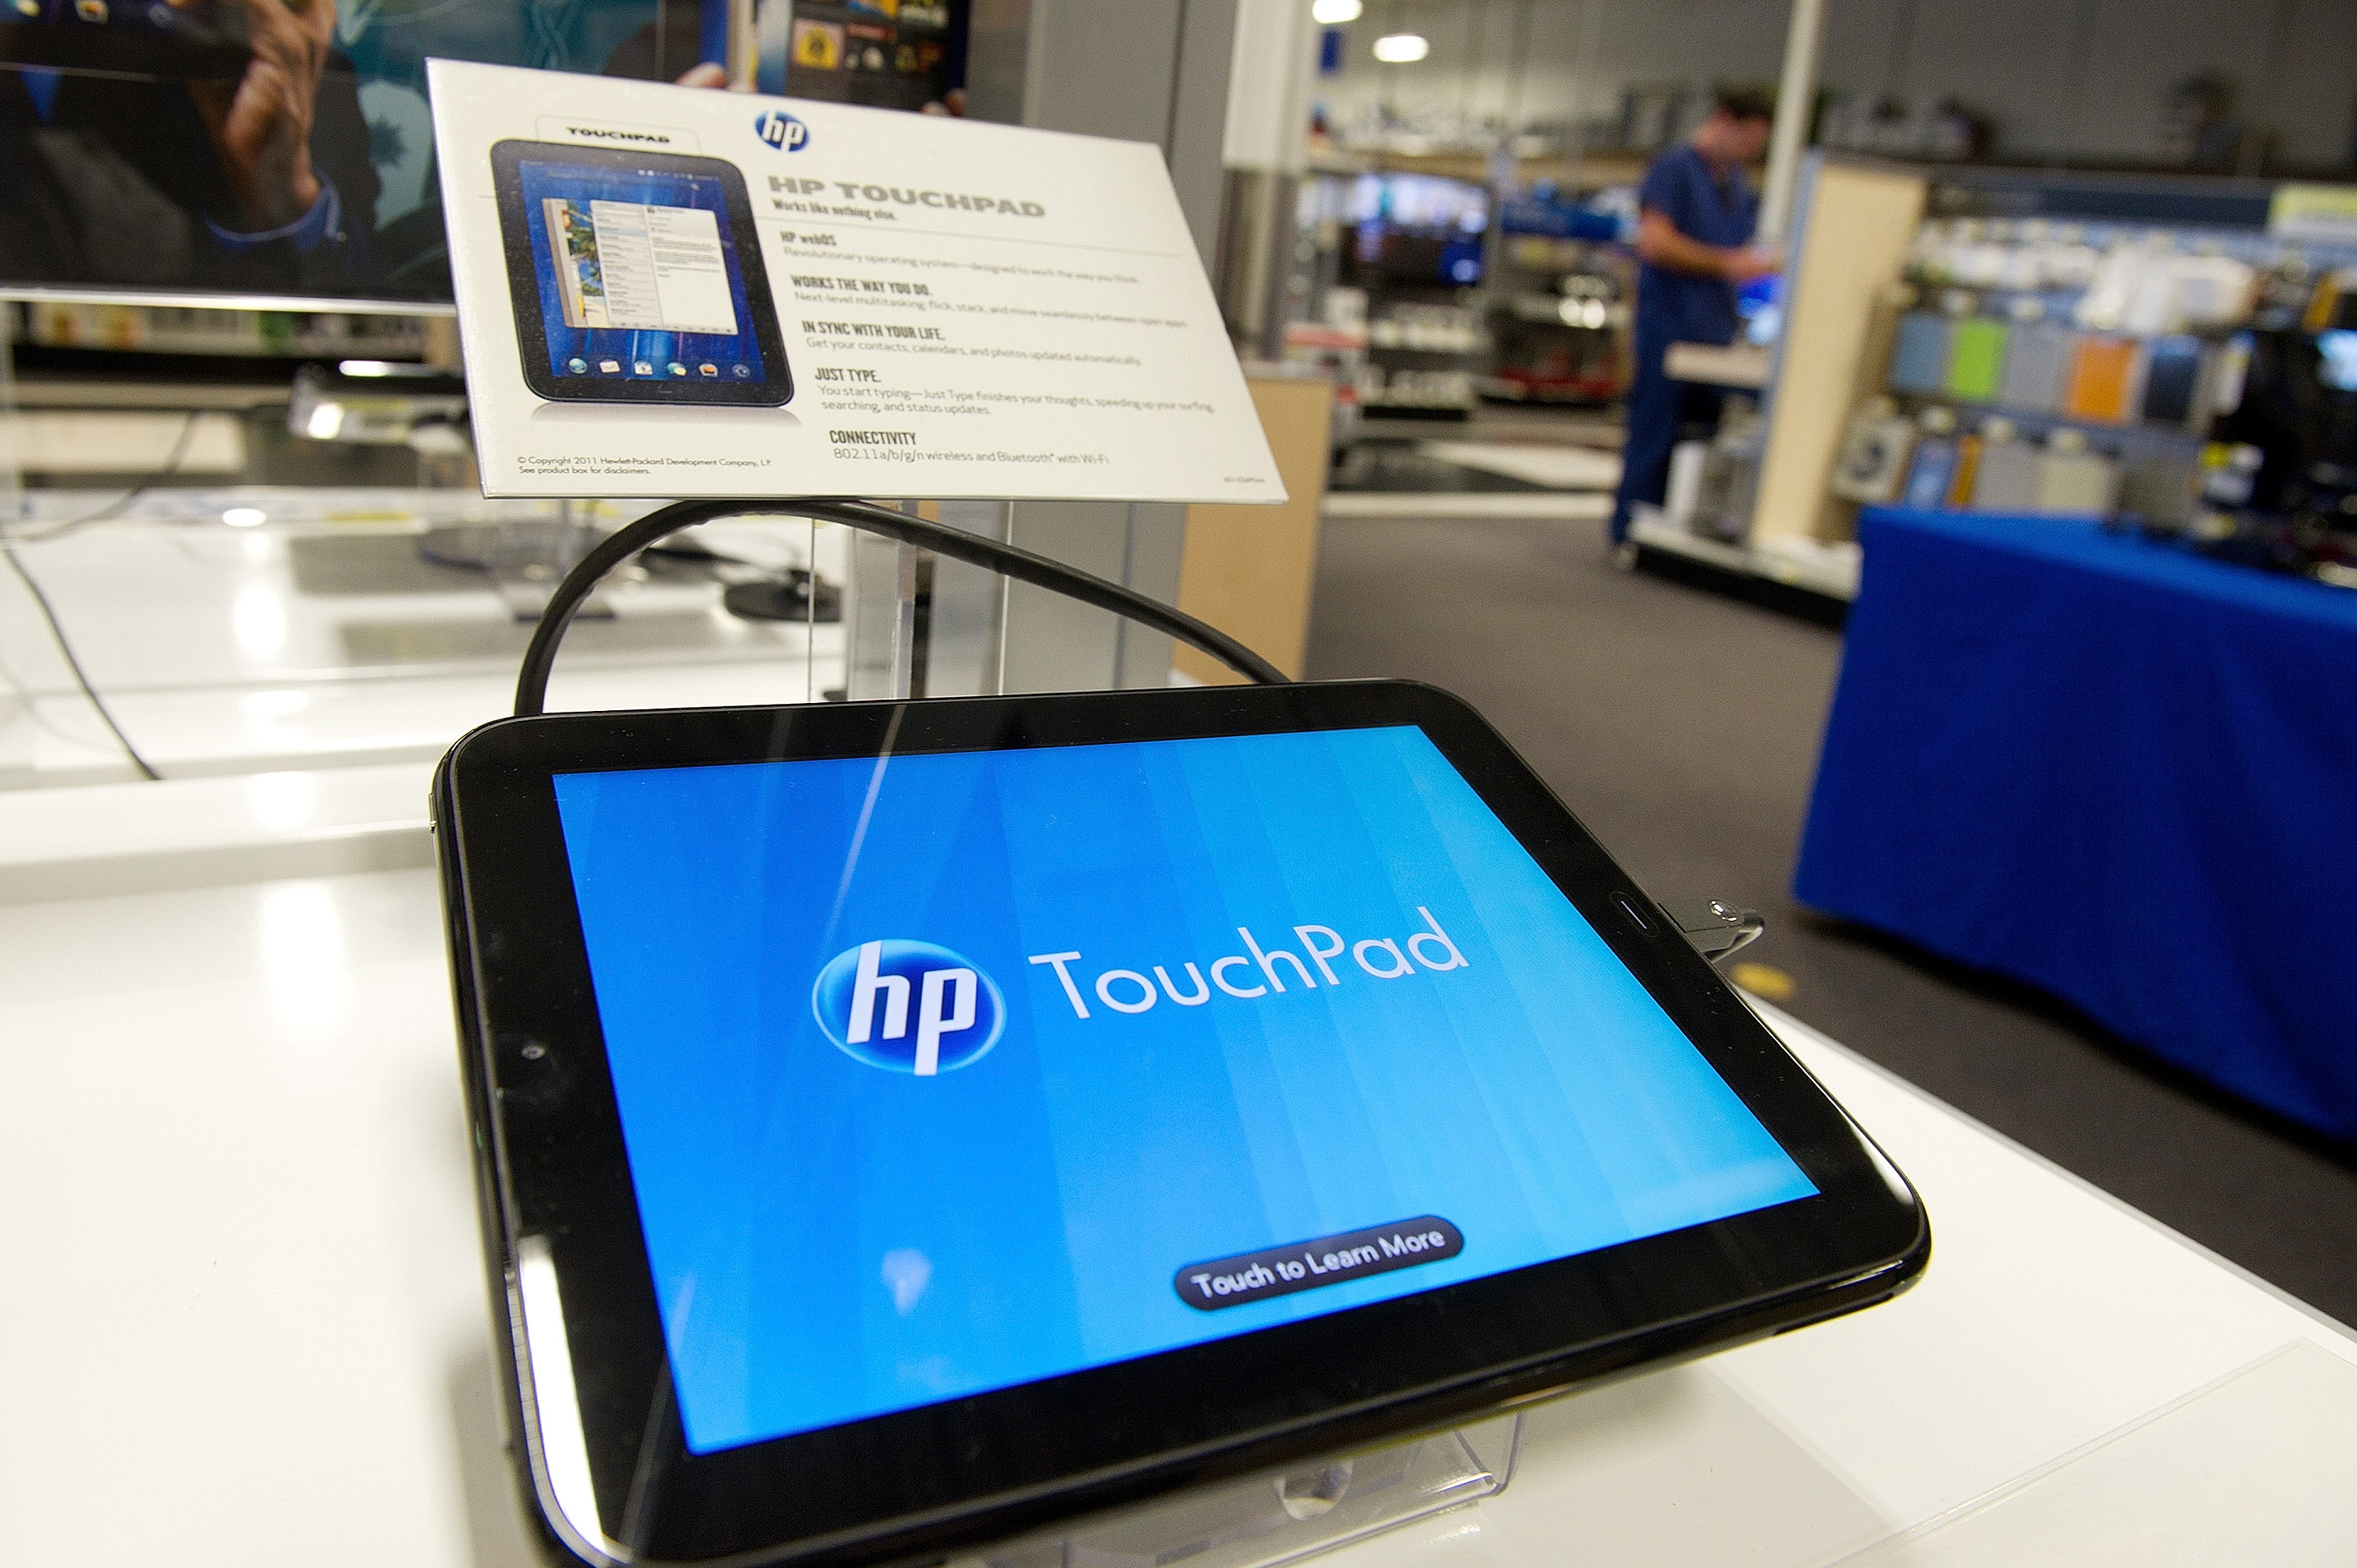 Hewlett-Packard's ill-fated TouchPad. (Bloomberg—Bloomberg via Getty Images)